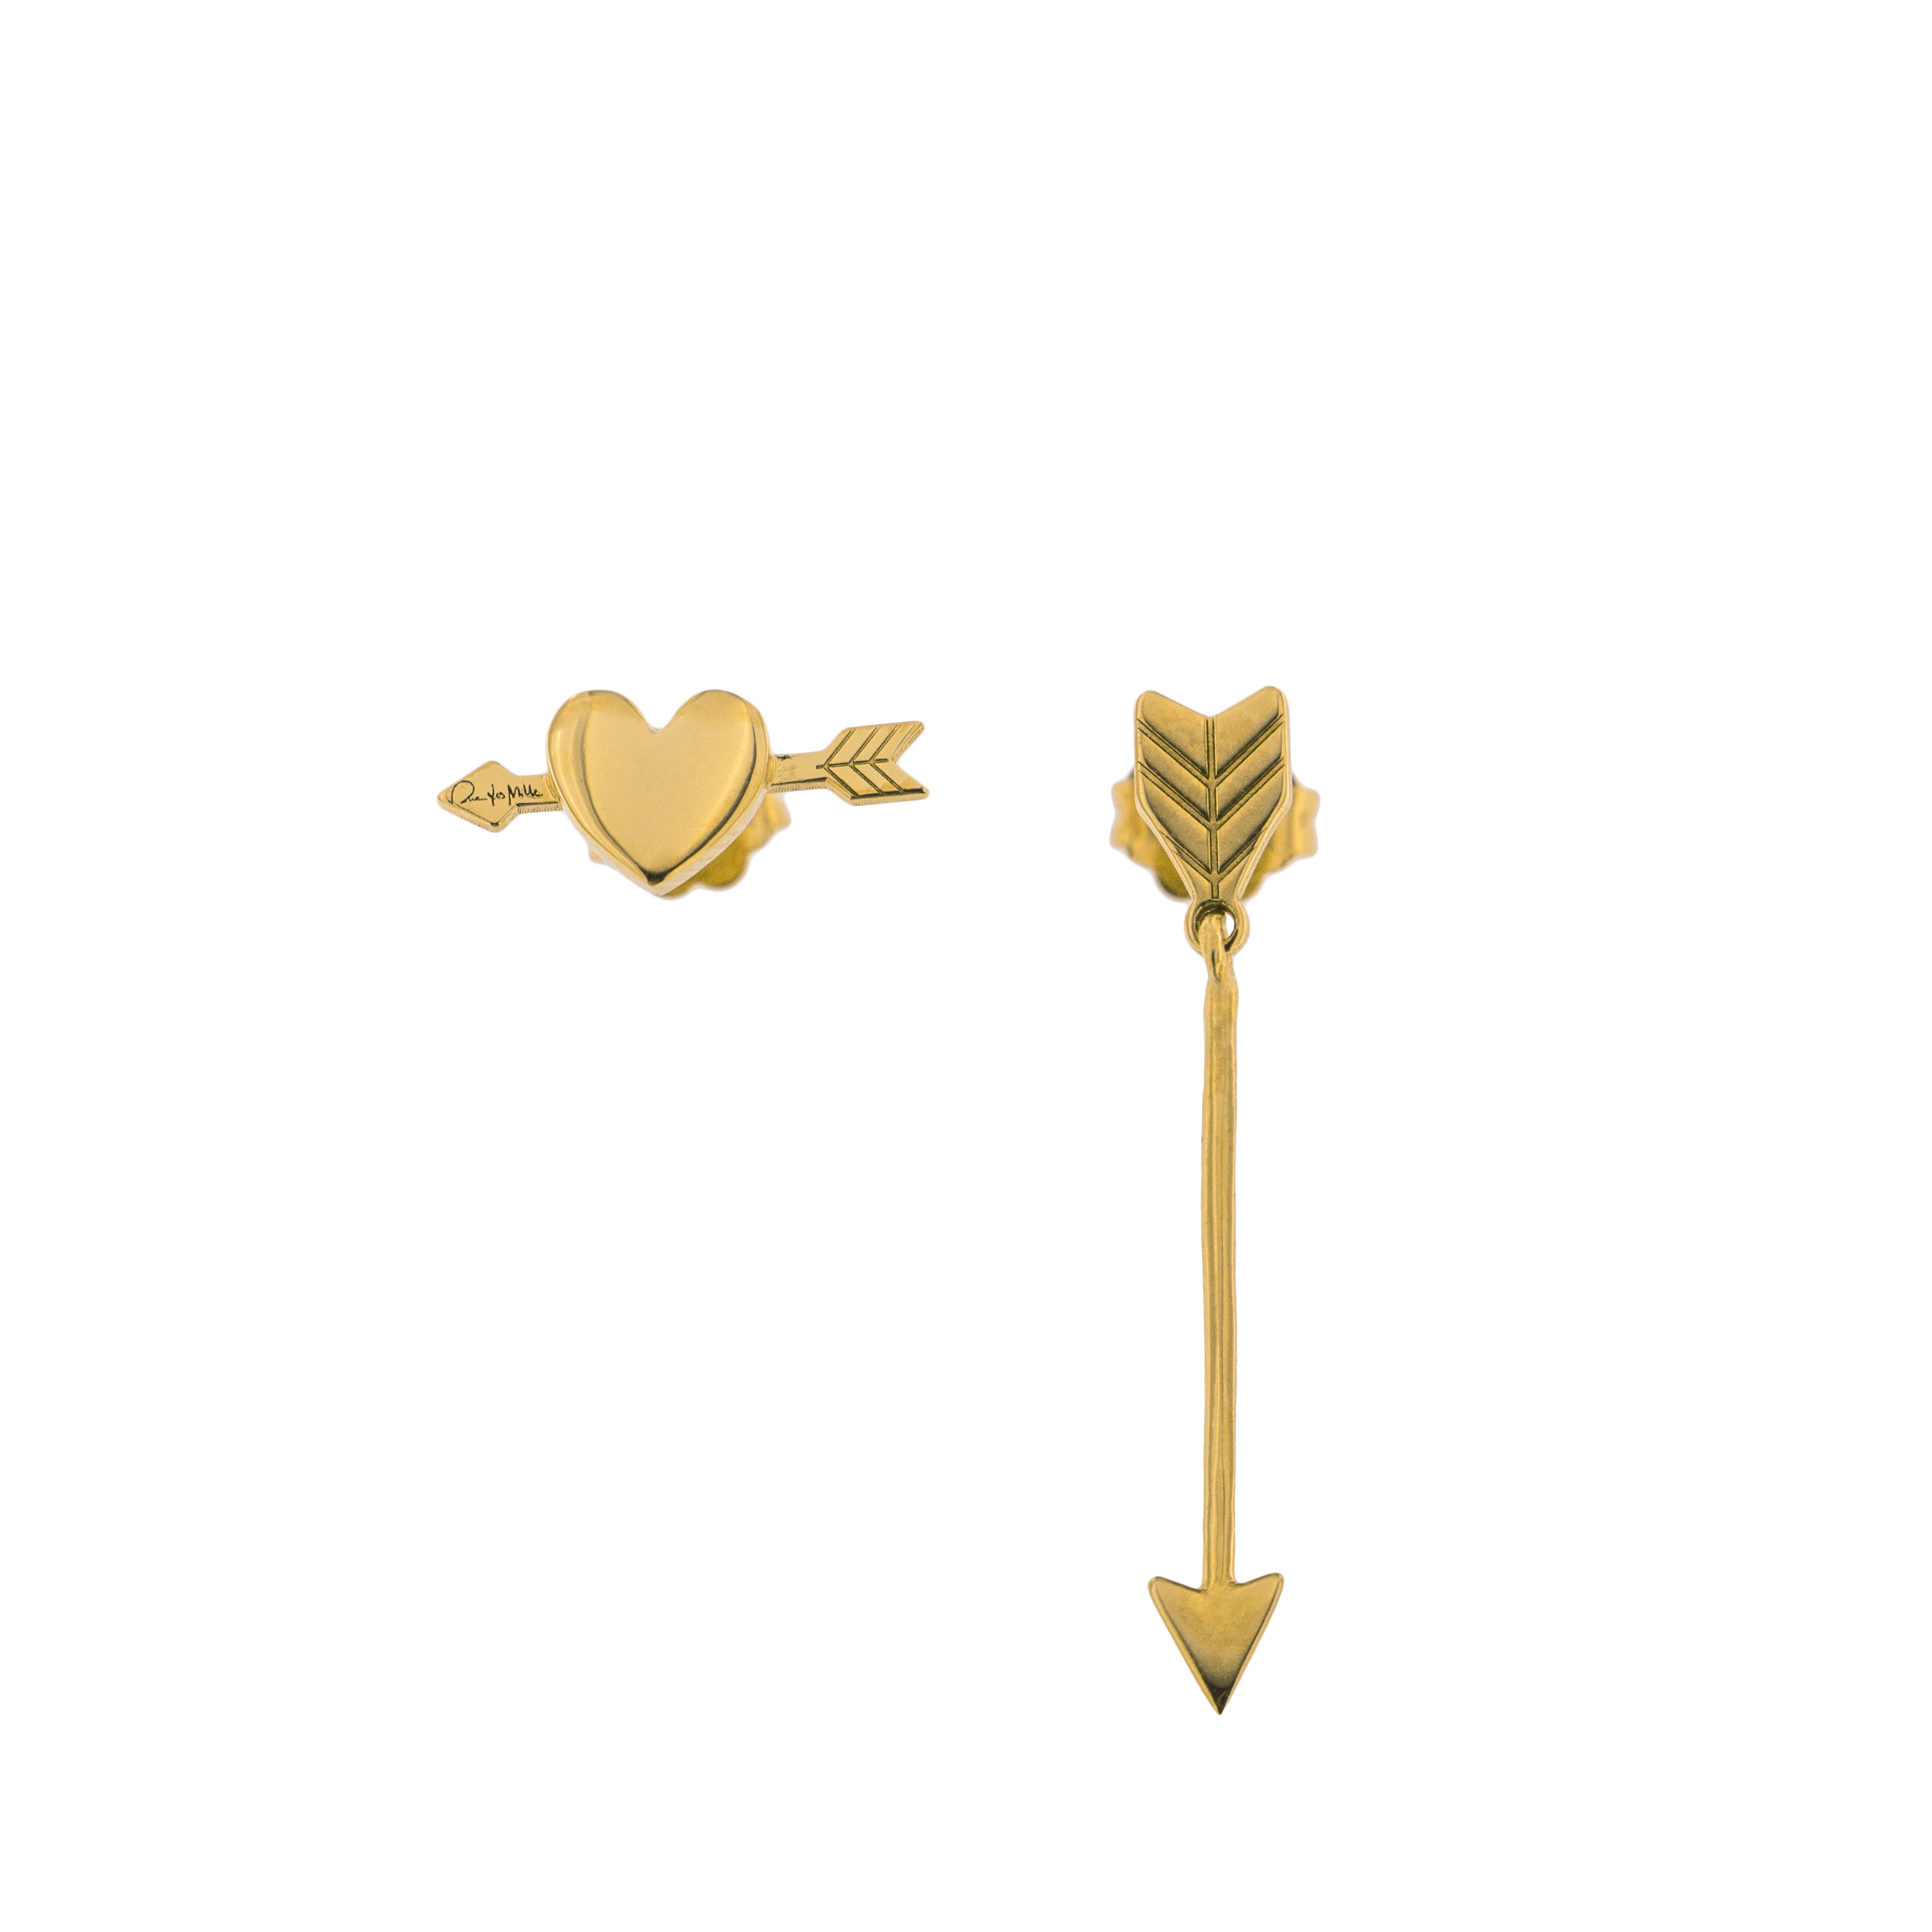 Earrings - Stud with Heart and Arrow Earring - 4 | Rue des Mille